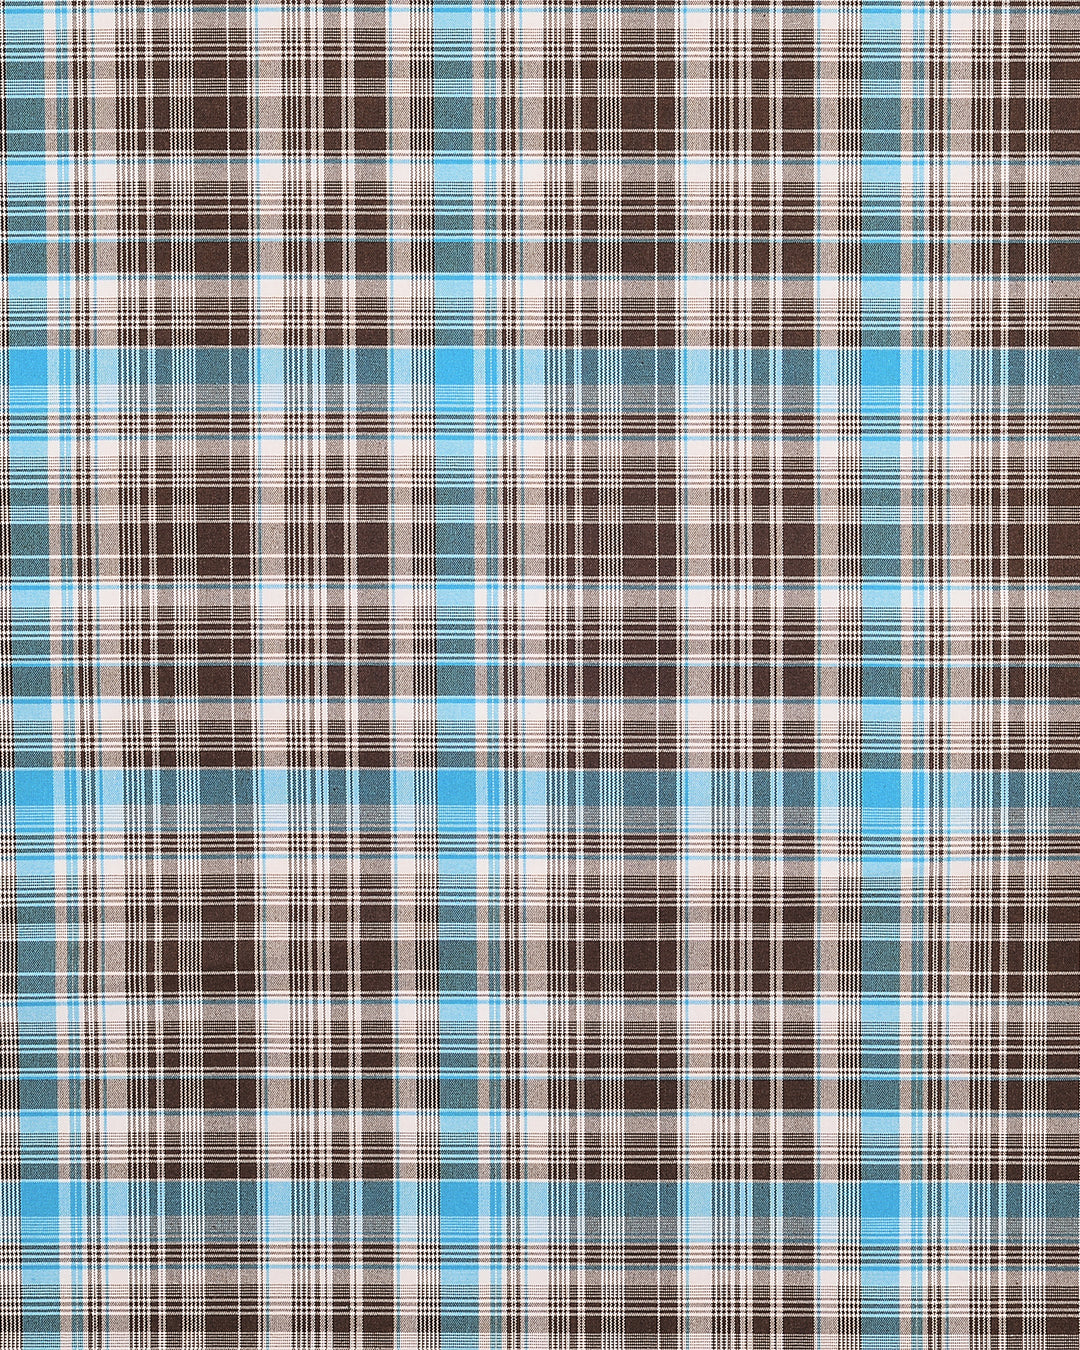 Closeup view of custom check shirts for men by Luxire choco brown and blue